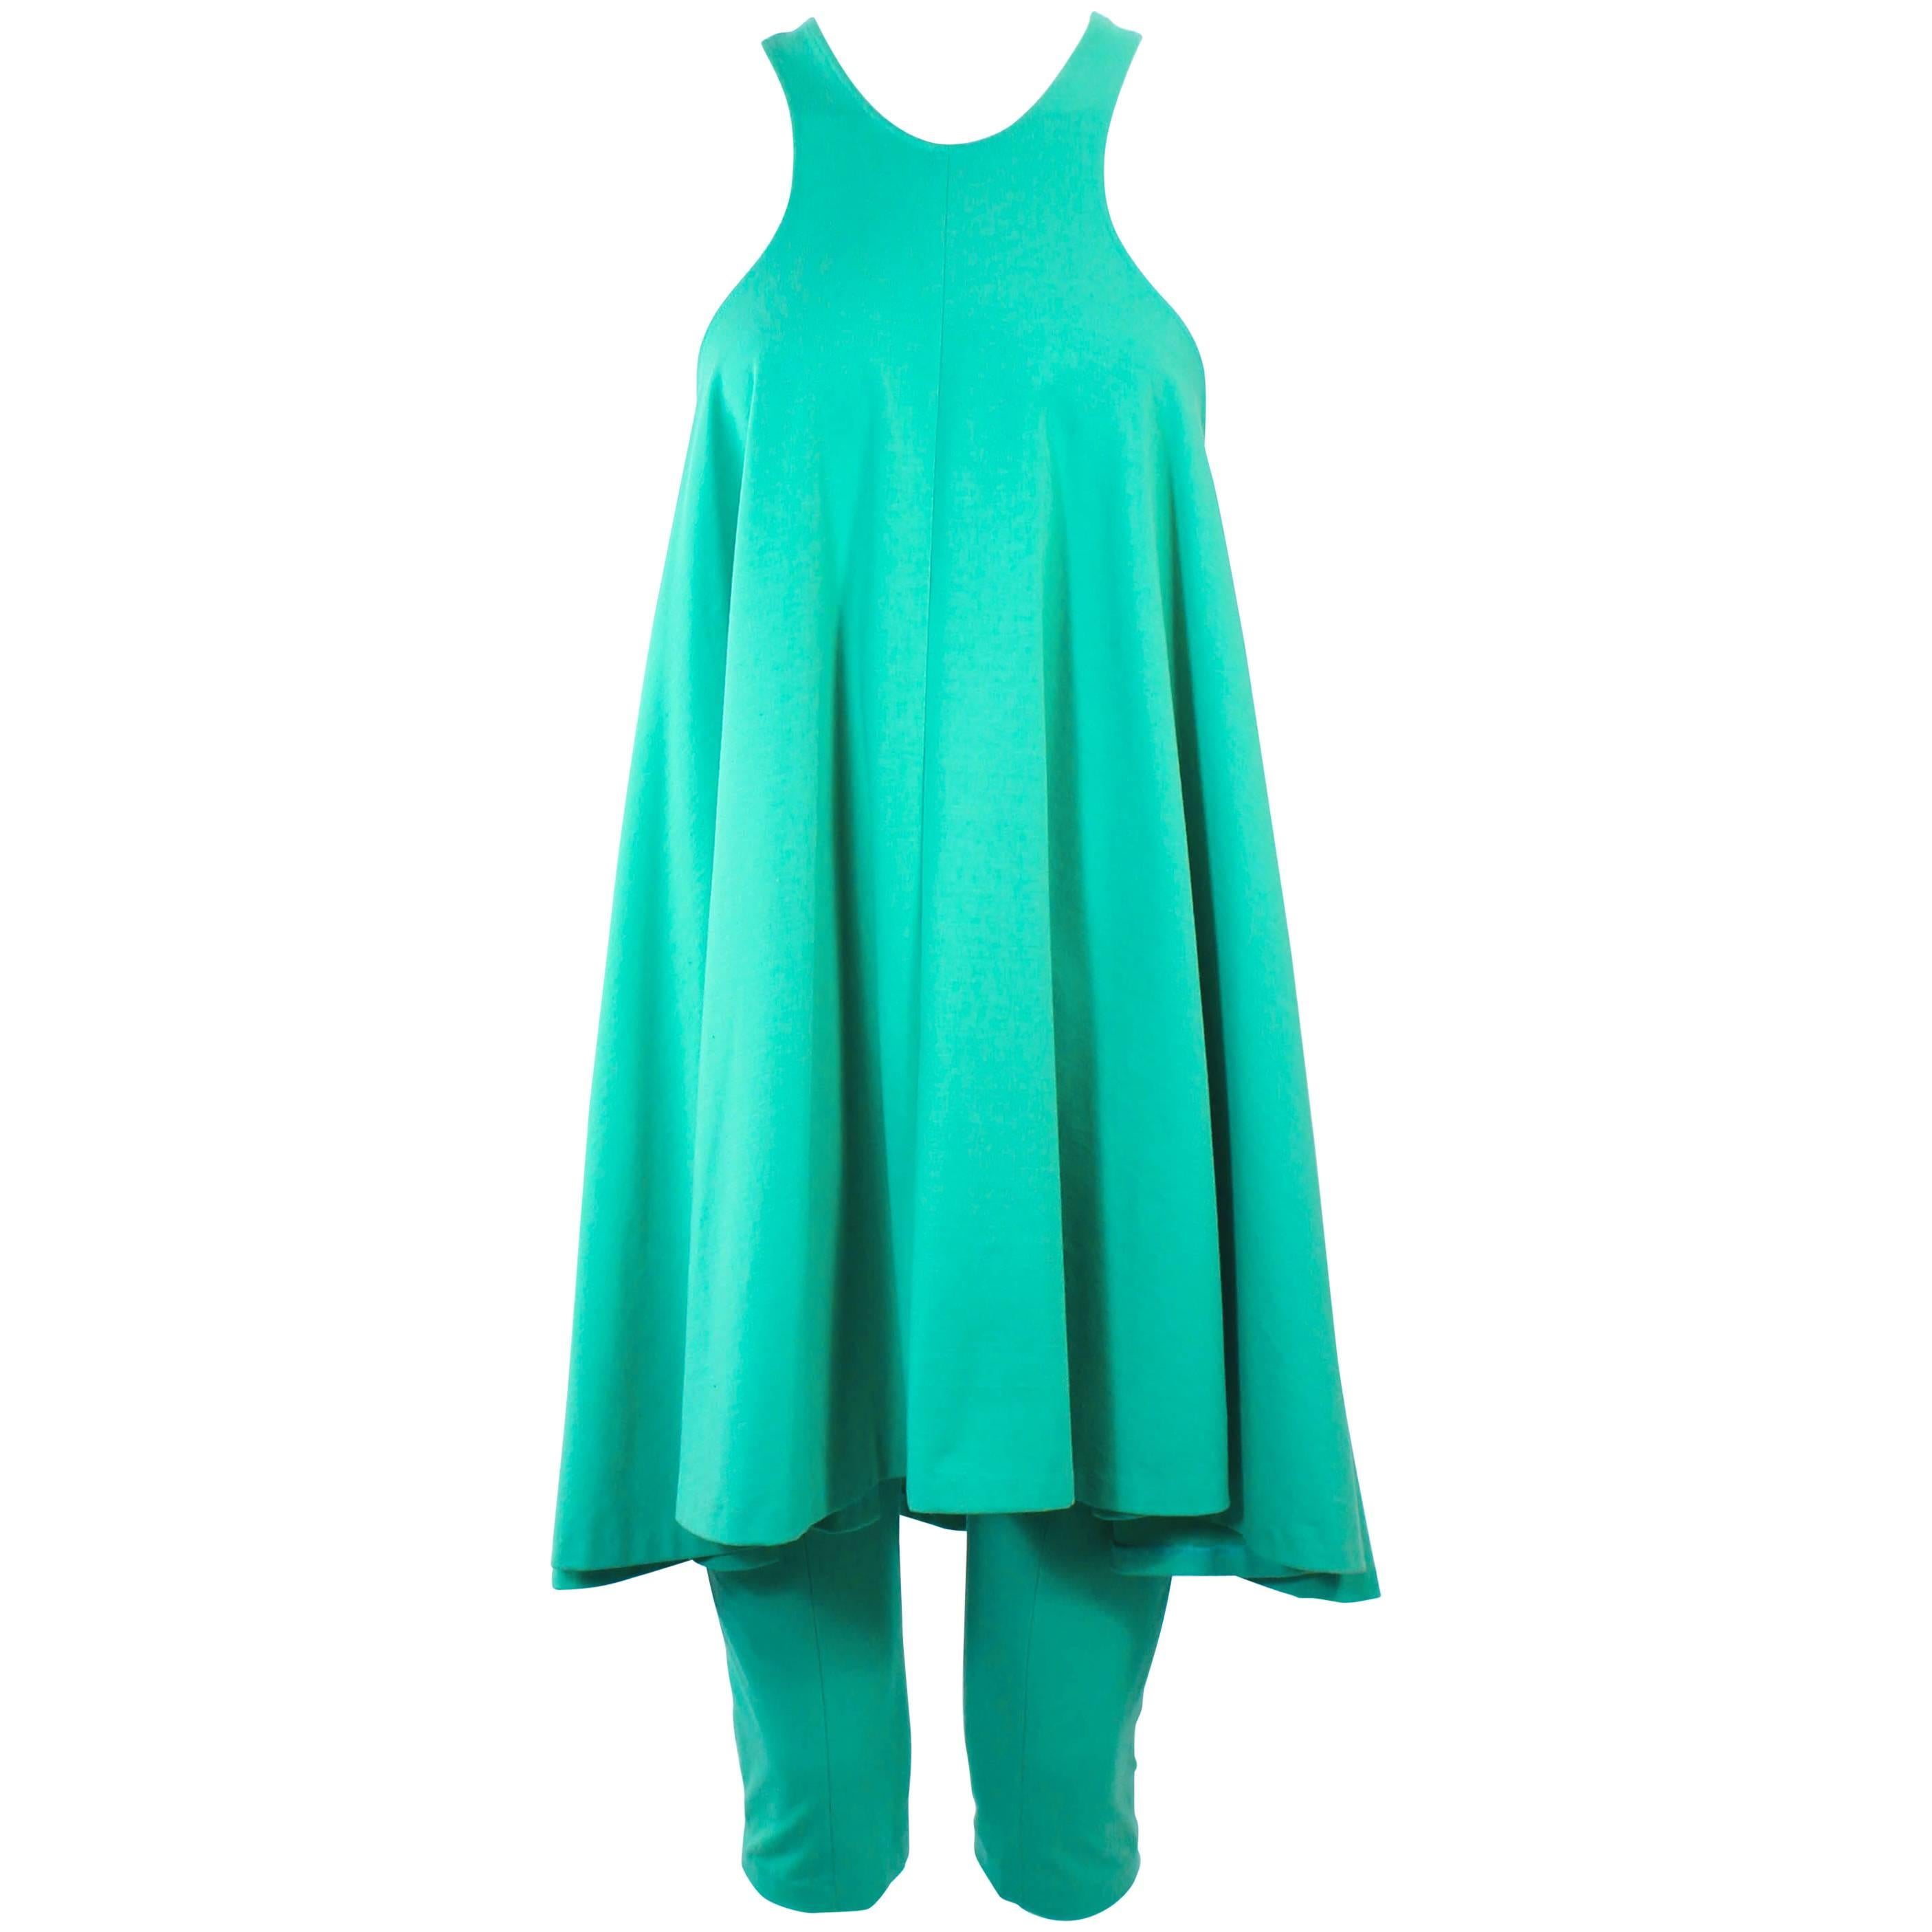 NORMA KAMALI OMO Mint Green Stretch Knit Trapeze Dress and Crop Pants Size M P For Sale